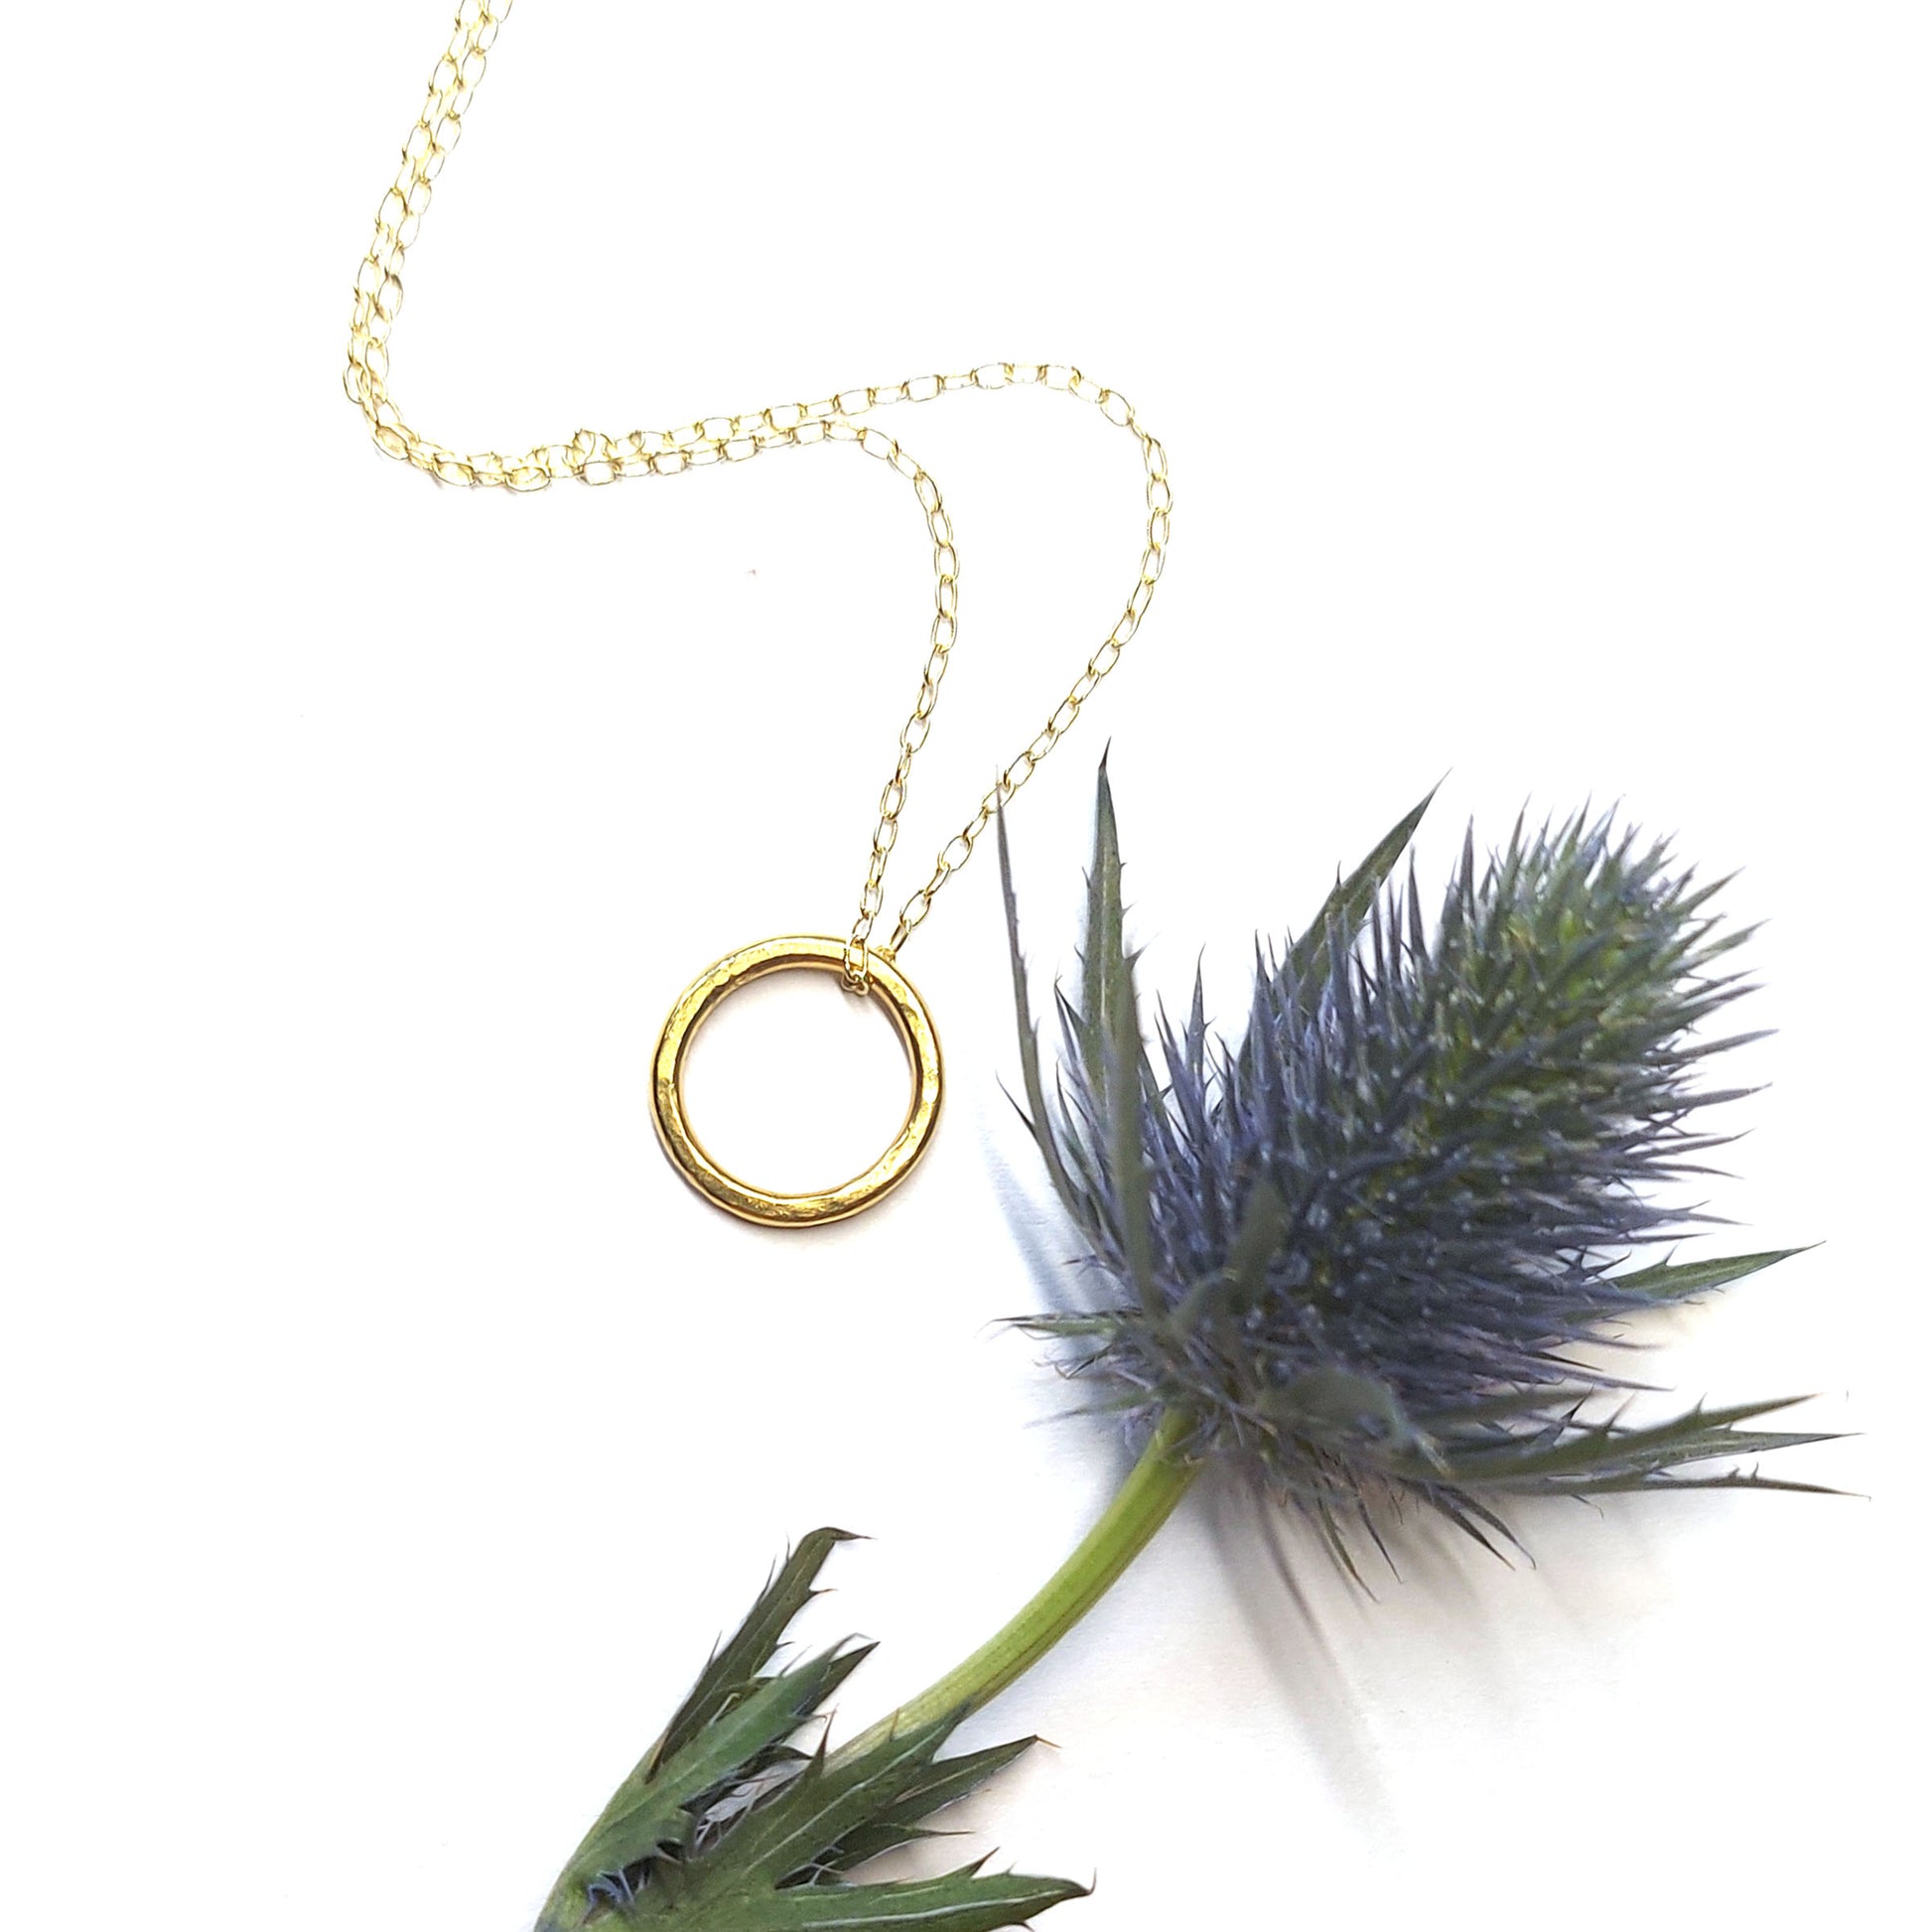 Yellow gold vermeil open circle pendant with hammered texture on a yellow gold vermeil chain. Small. Pictured with thistle.